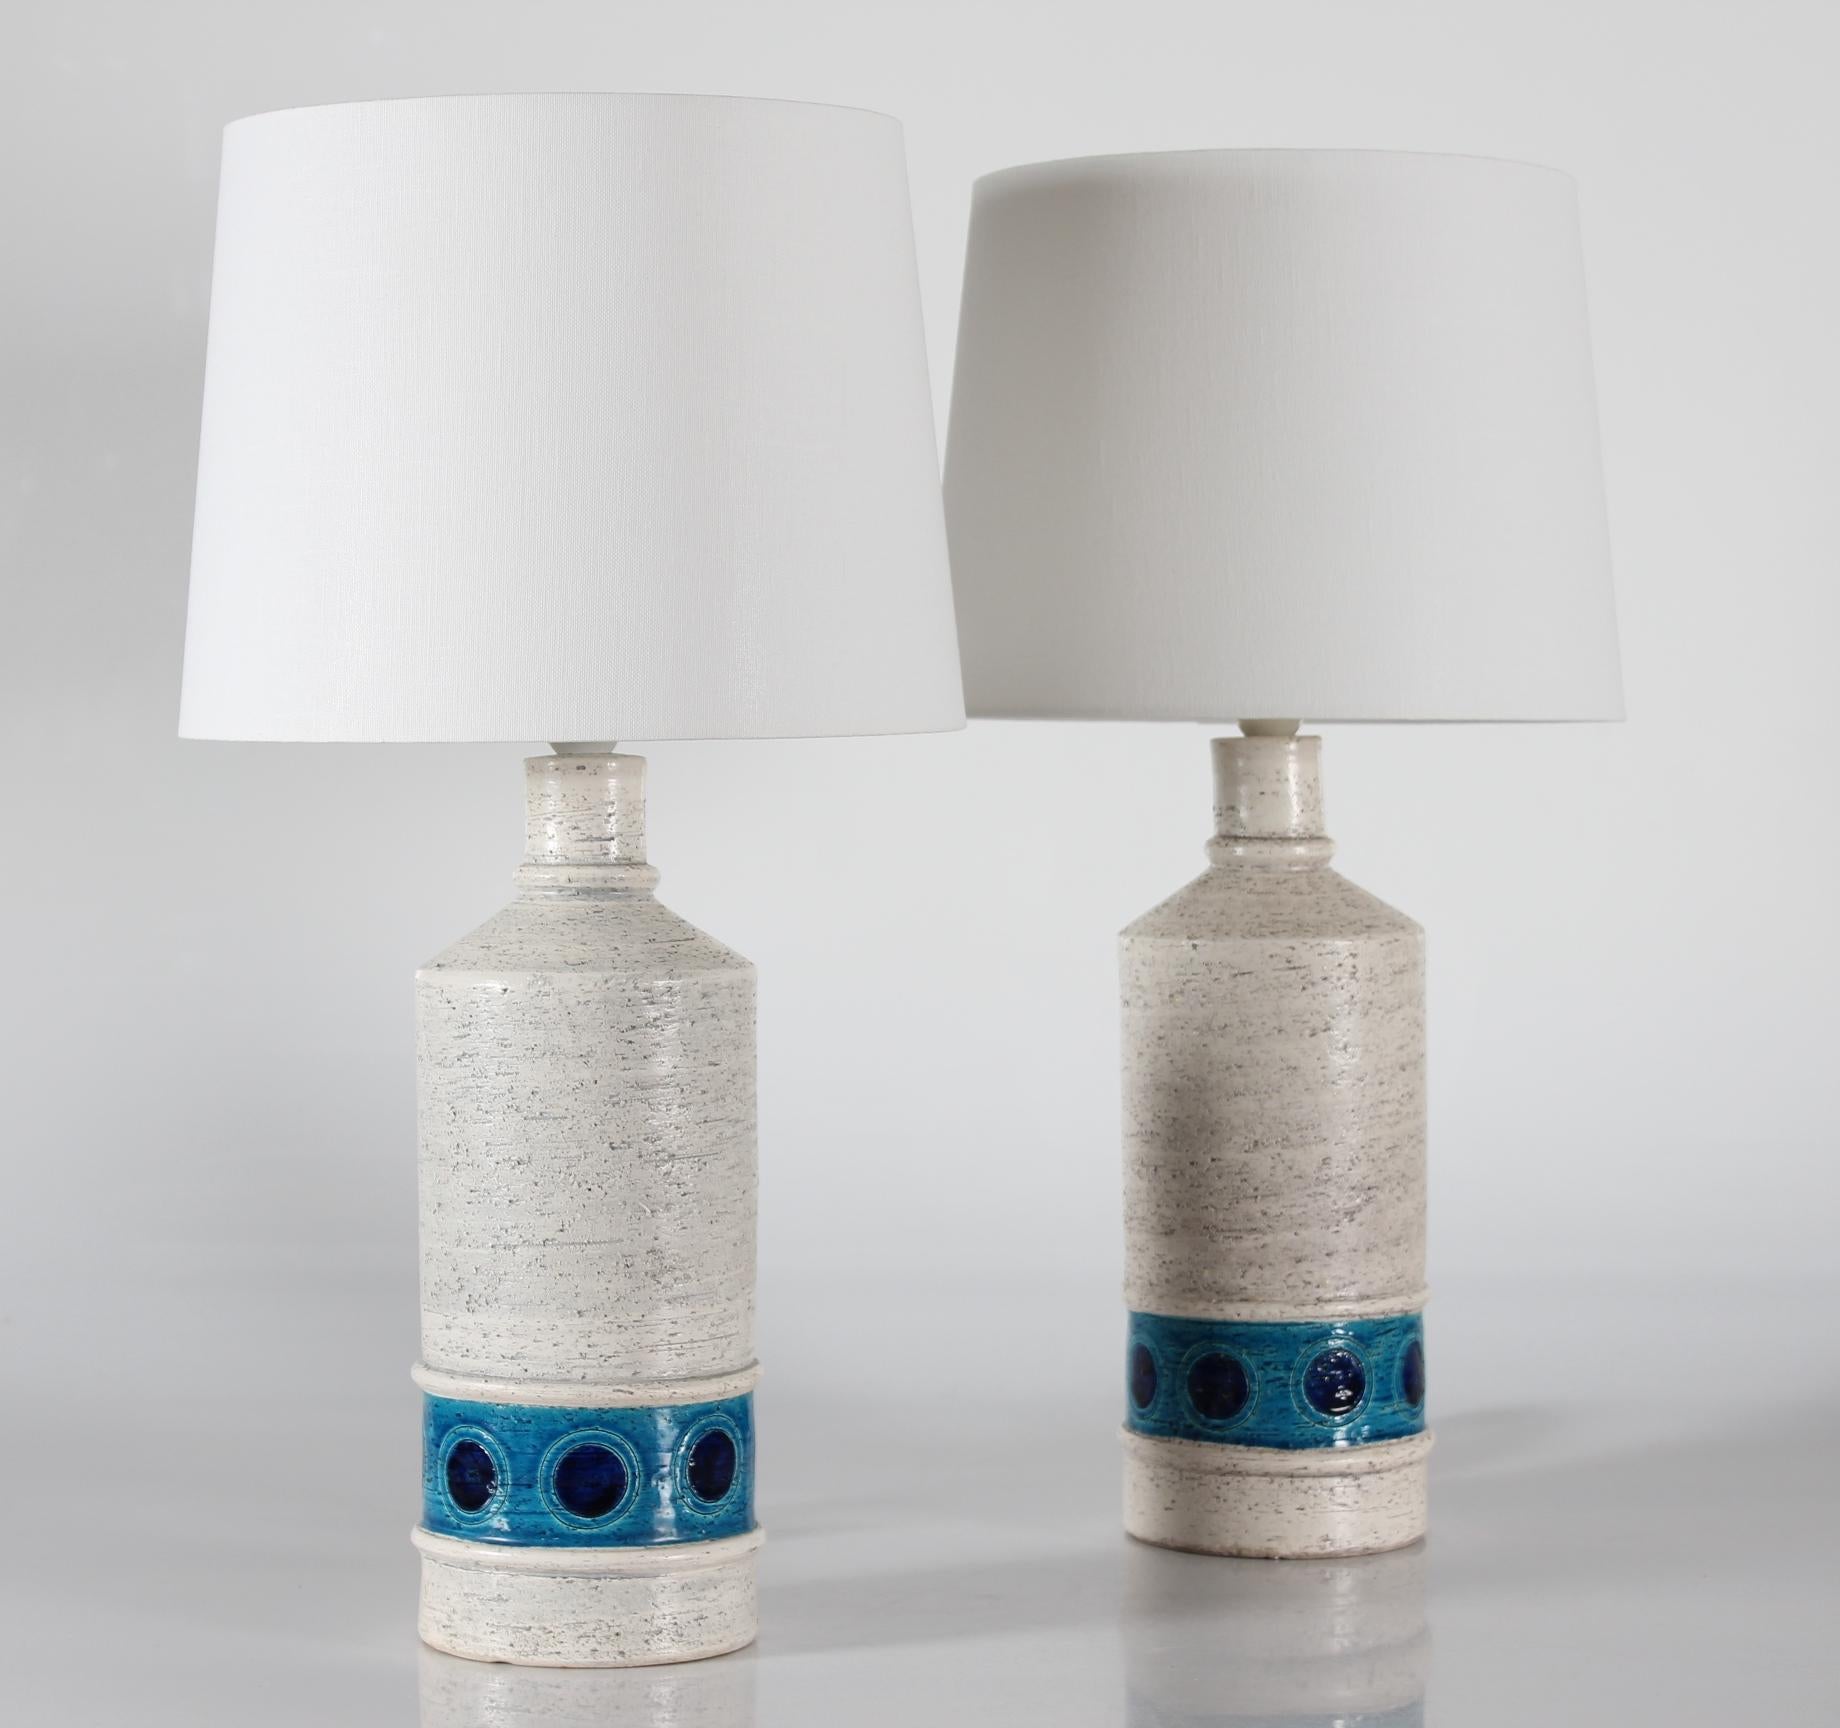 Pair of vintage Aldo Londi Bitossi table lamps with new quality lampshades

They have a rough white surface with a blue and black circle decor.

The lampshades are designed in Denmark and made of woven fabric with some texture and are natural